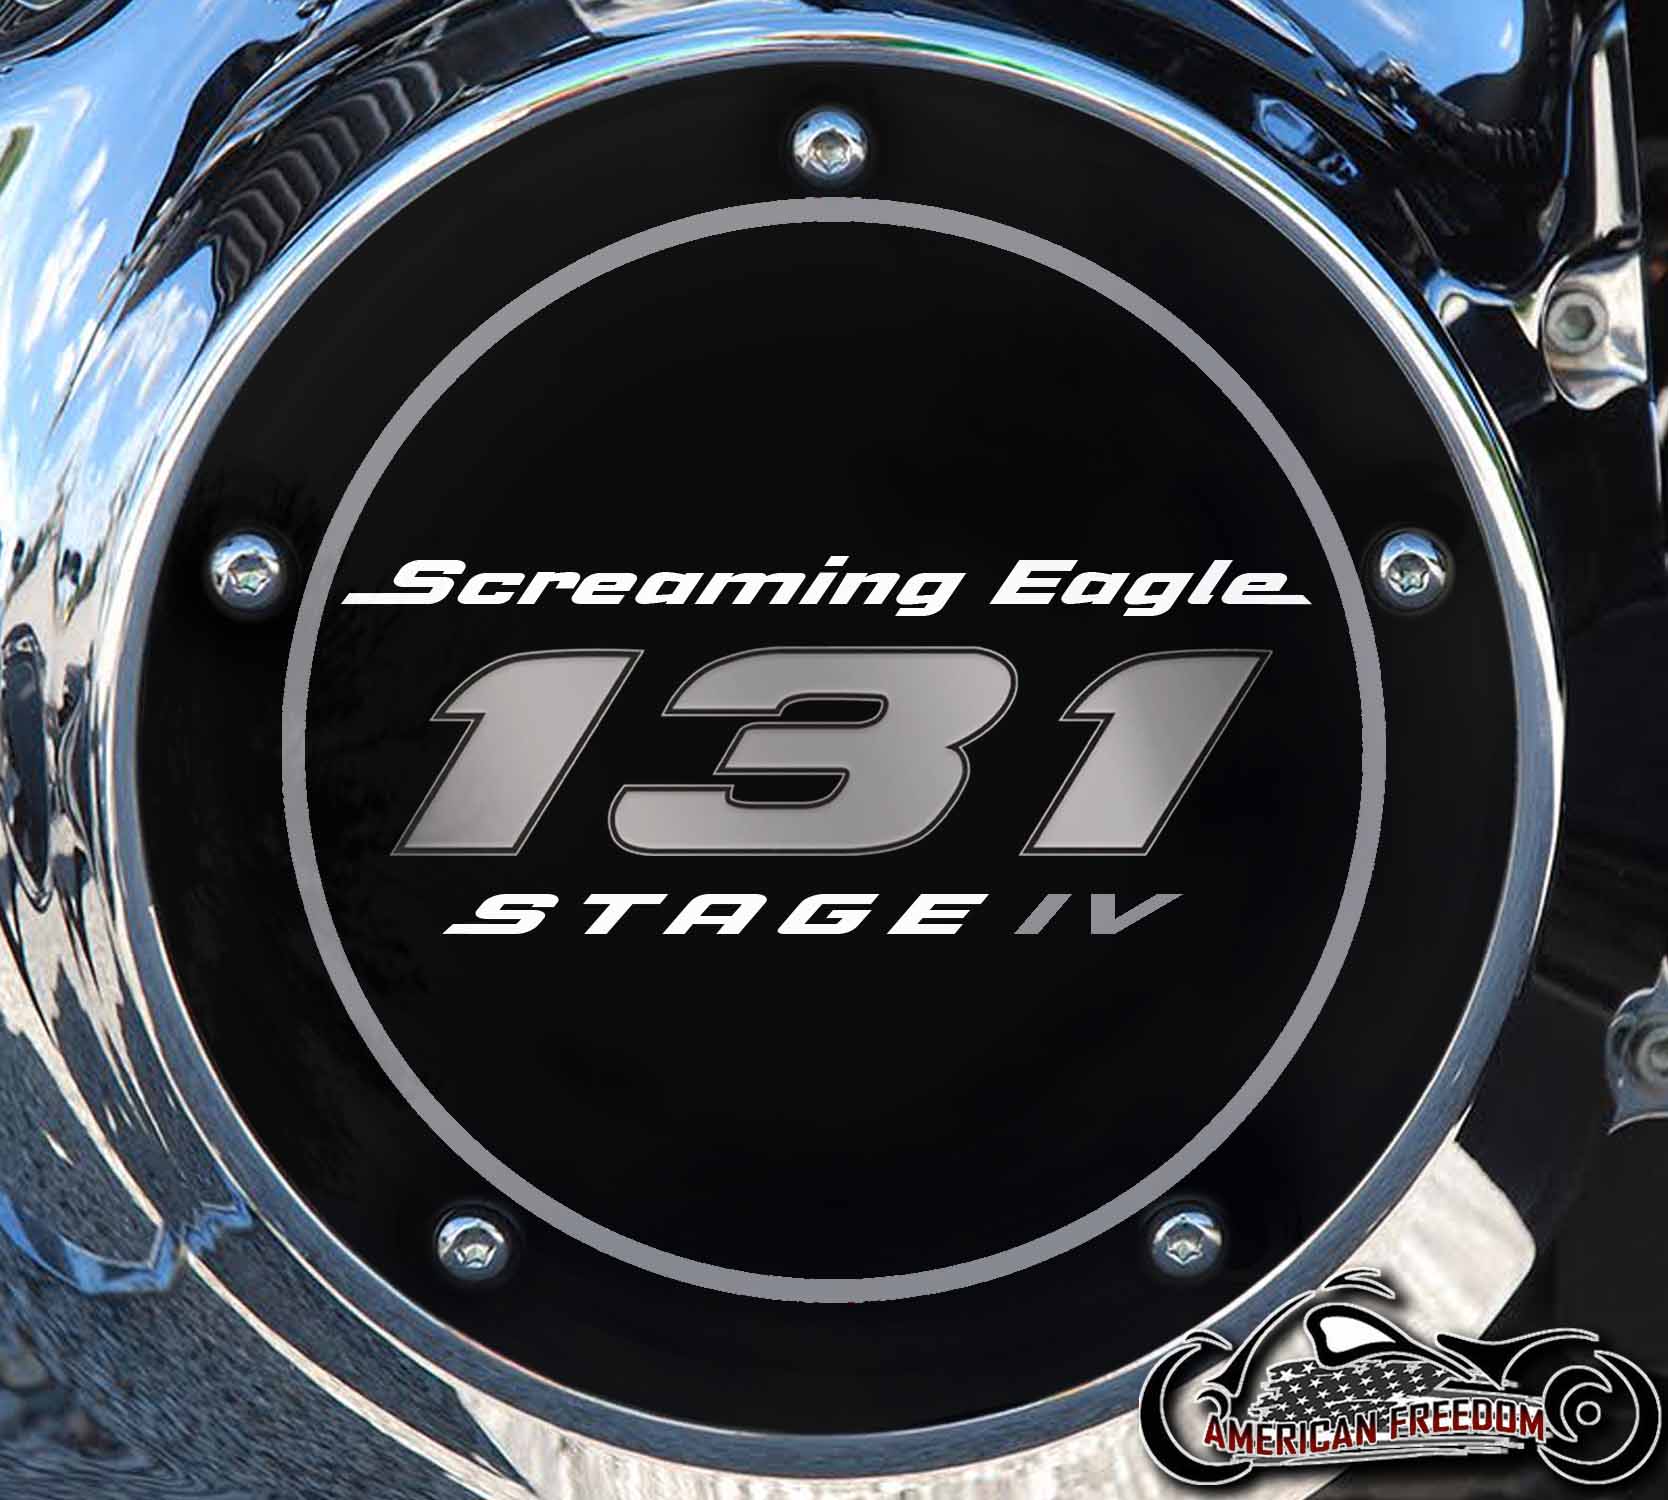 Screaming Eagle Stage IV 131 Derby cover "Gray"